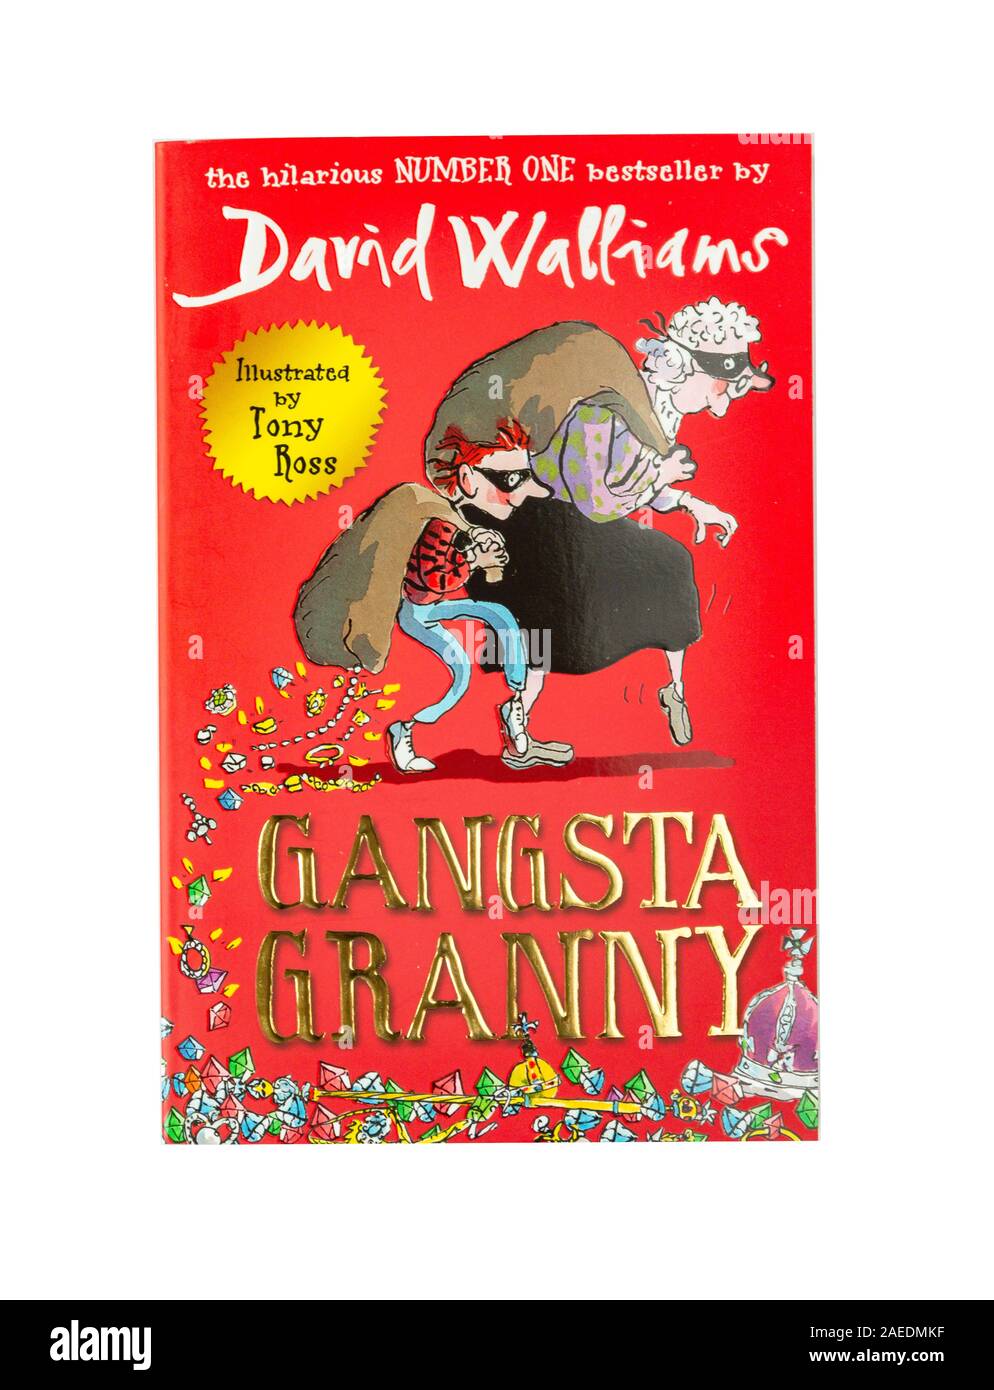 David Walliams 'Gamgsta Granny' children's book, Greater London, Angleterre, Royaume-Uni Banque D'Images